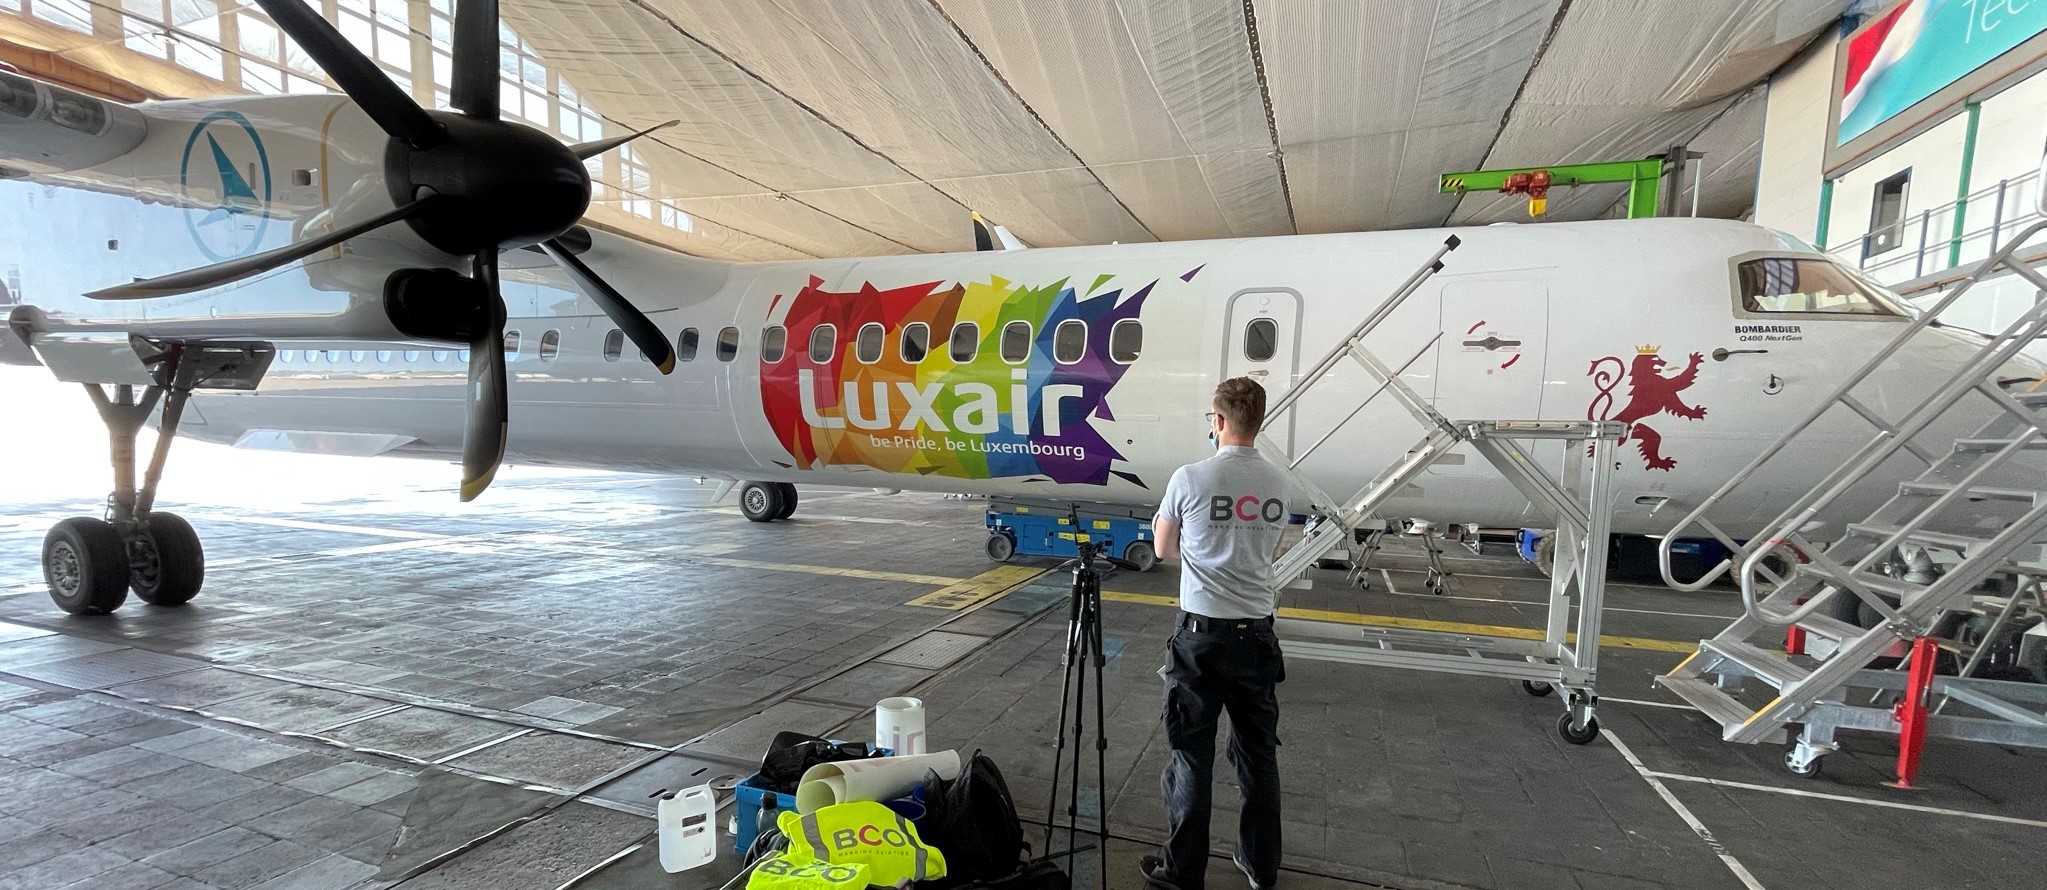 Illustration for: We installed a colourful new aircraft livery on De Havilland Q400 for Luxair Airlines (Video)